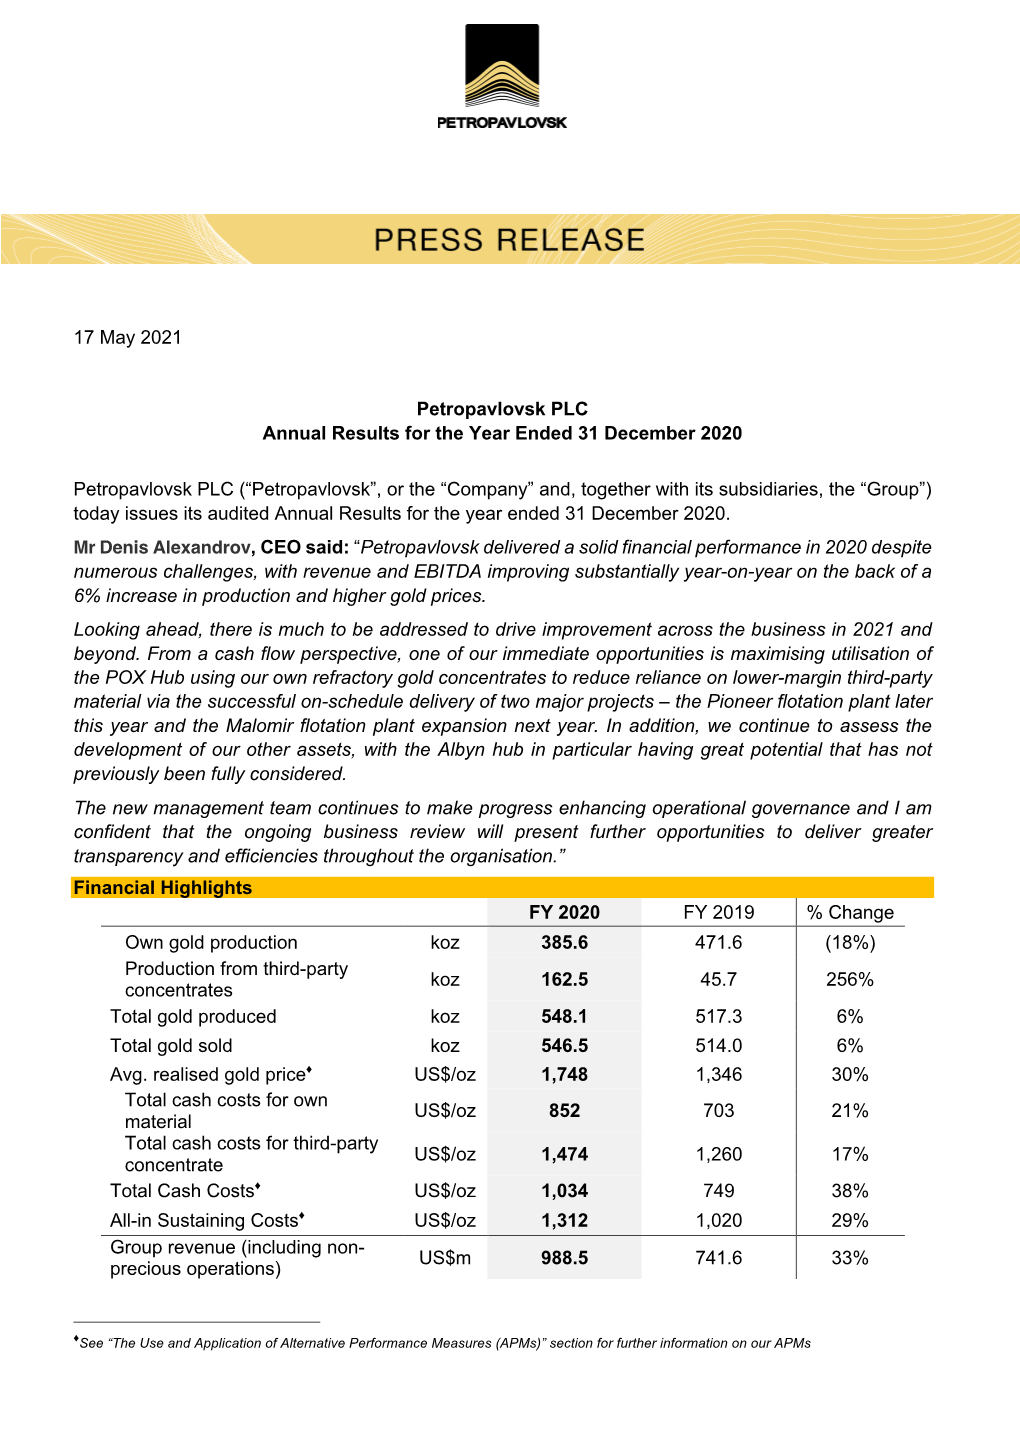 Annual Results for the Year Ended 31 December 2020